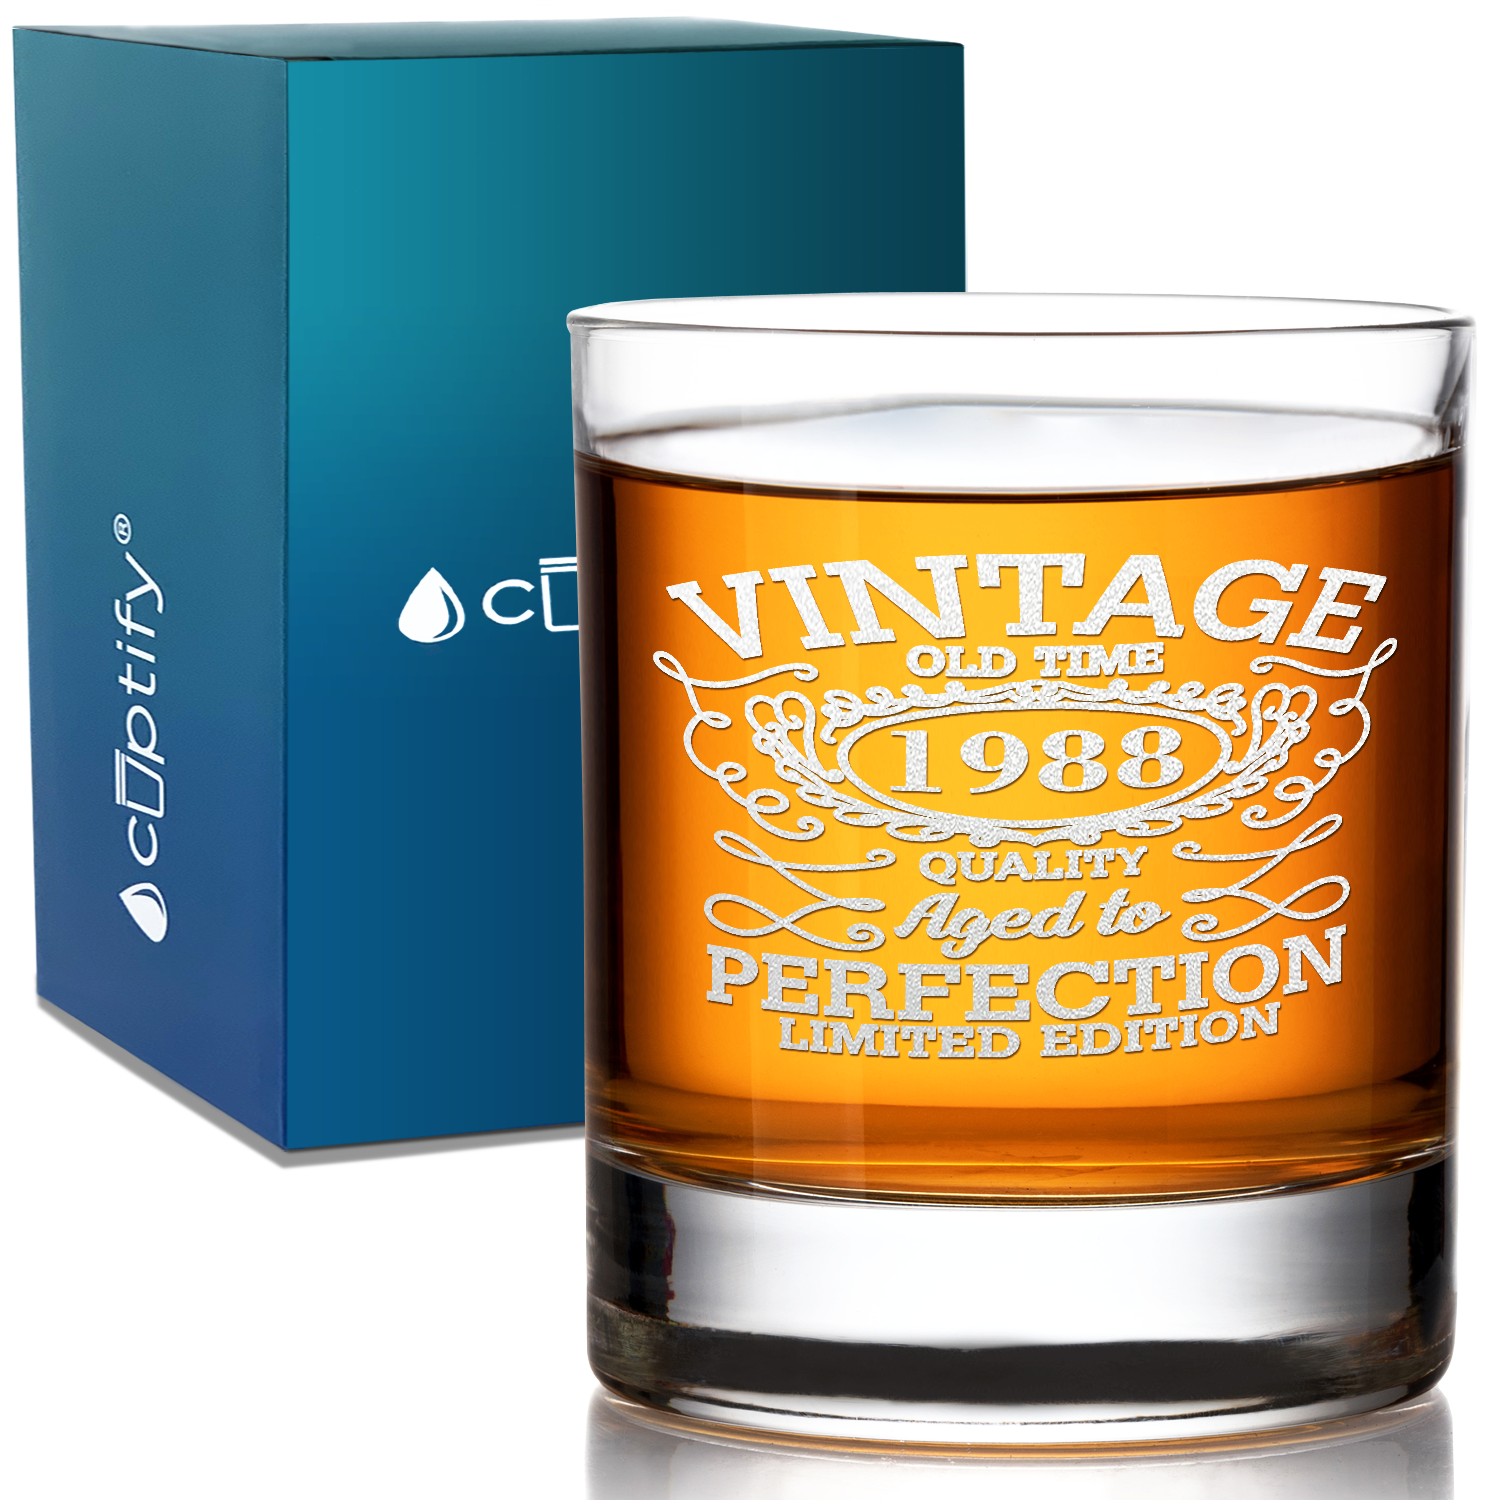 33rd Birthday Vintage 33 Years Old Time 1988 Quality Laser Engraved 10.25oz Old Fashion Glass